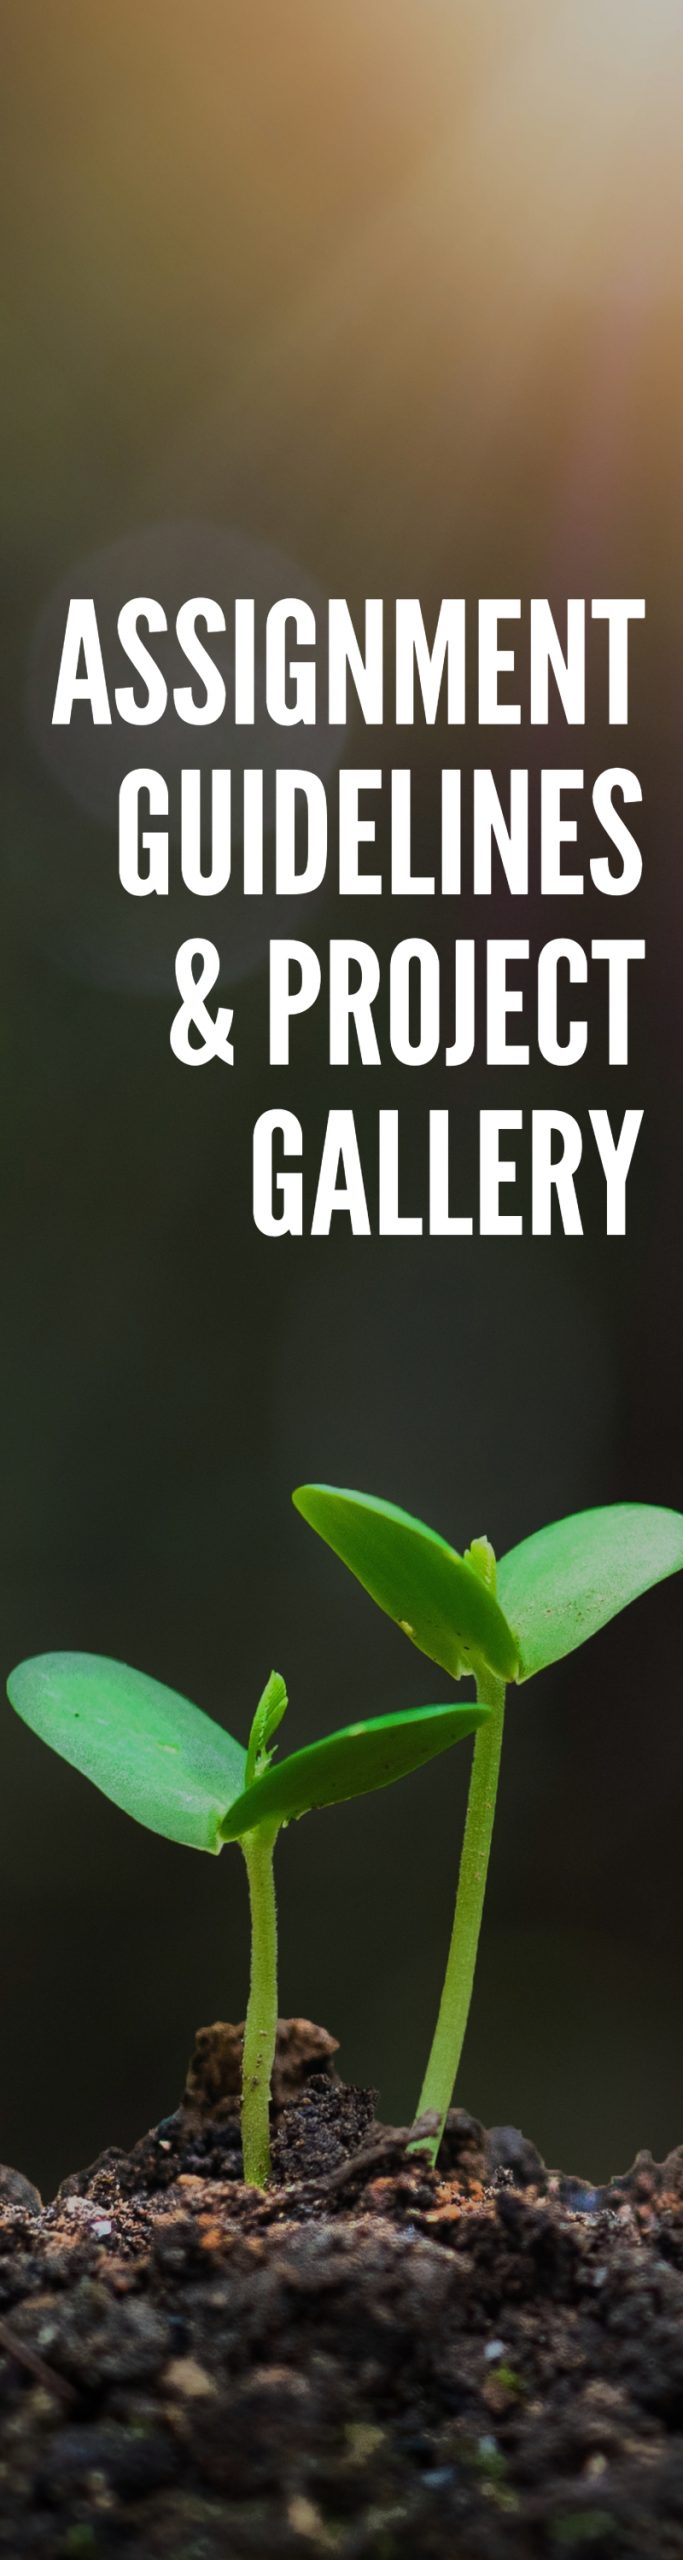 A long banner with a growing plant on the bottom and the words "Assignment Guidelines & Project Gallery" written in white.